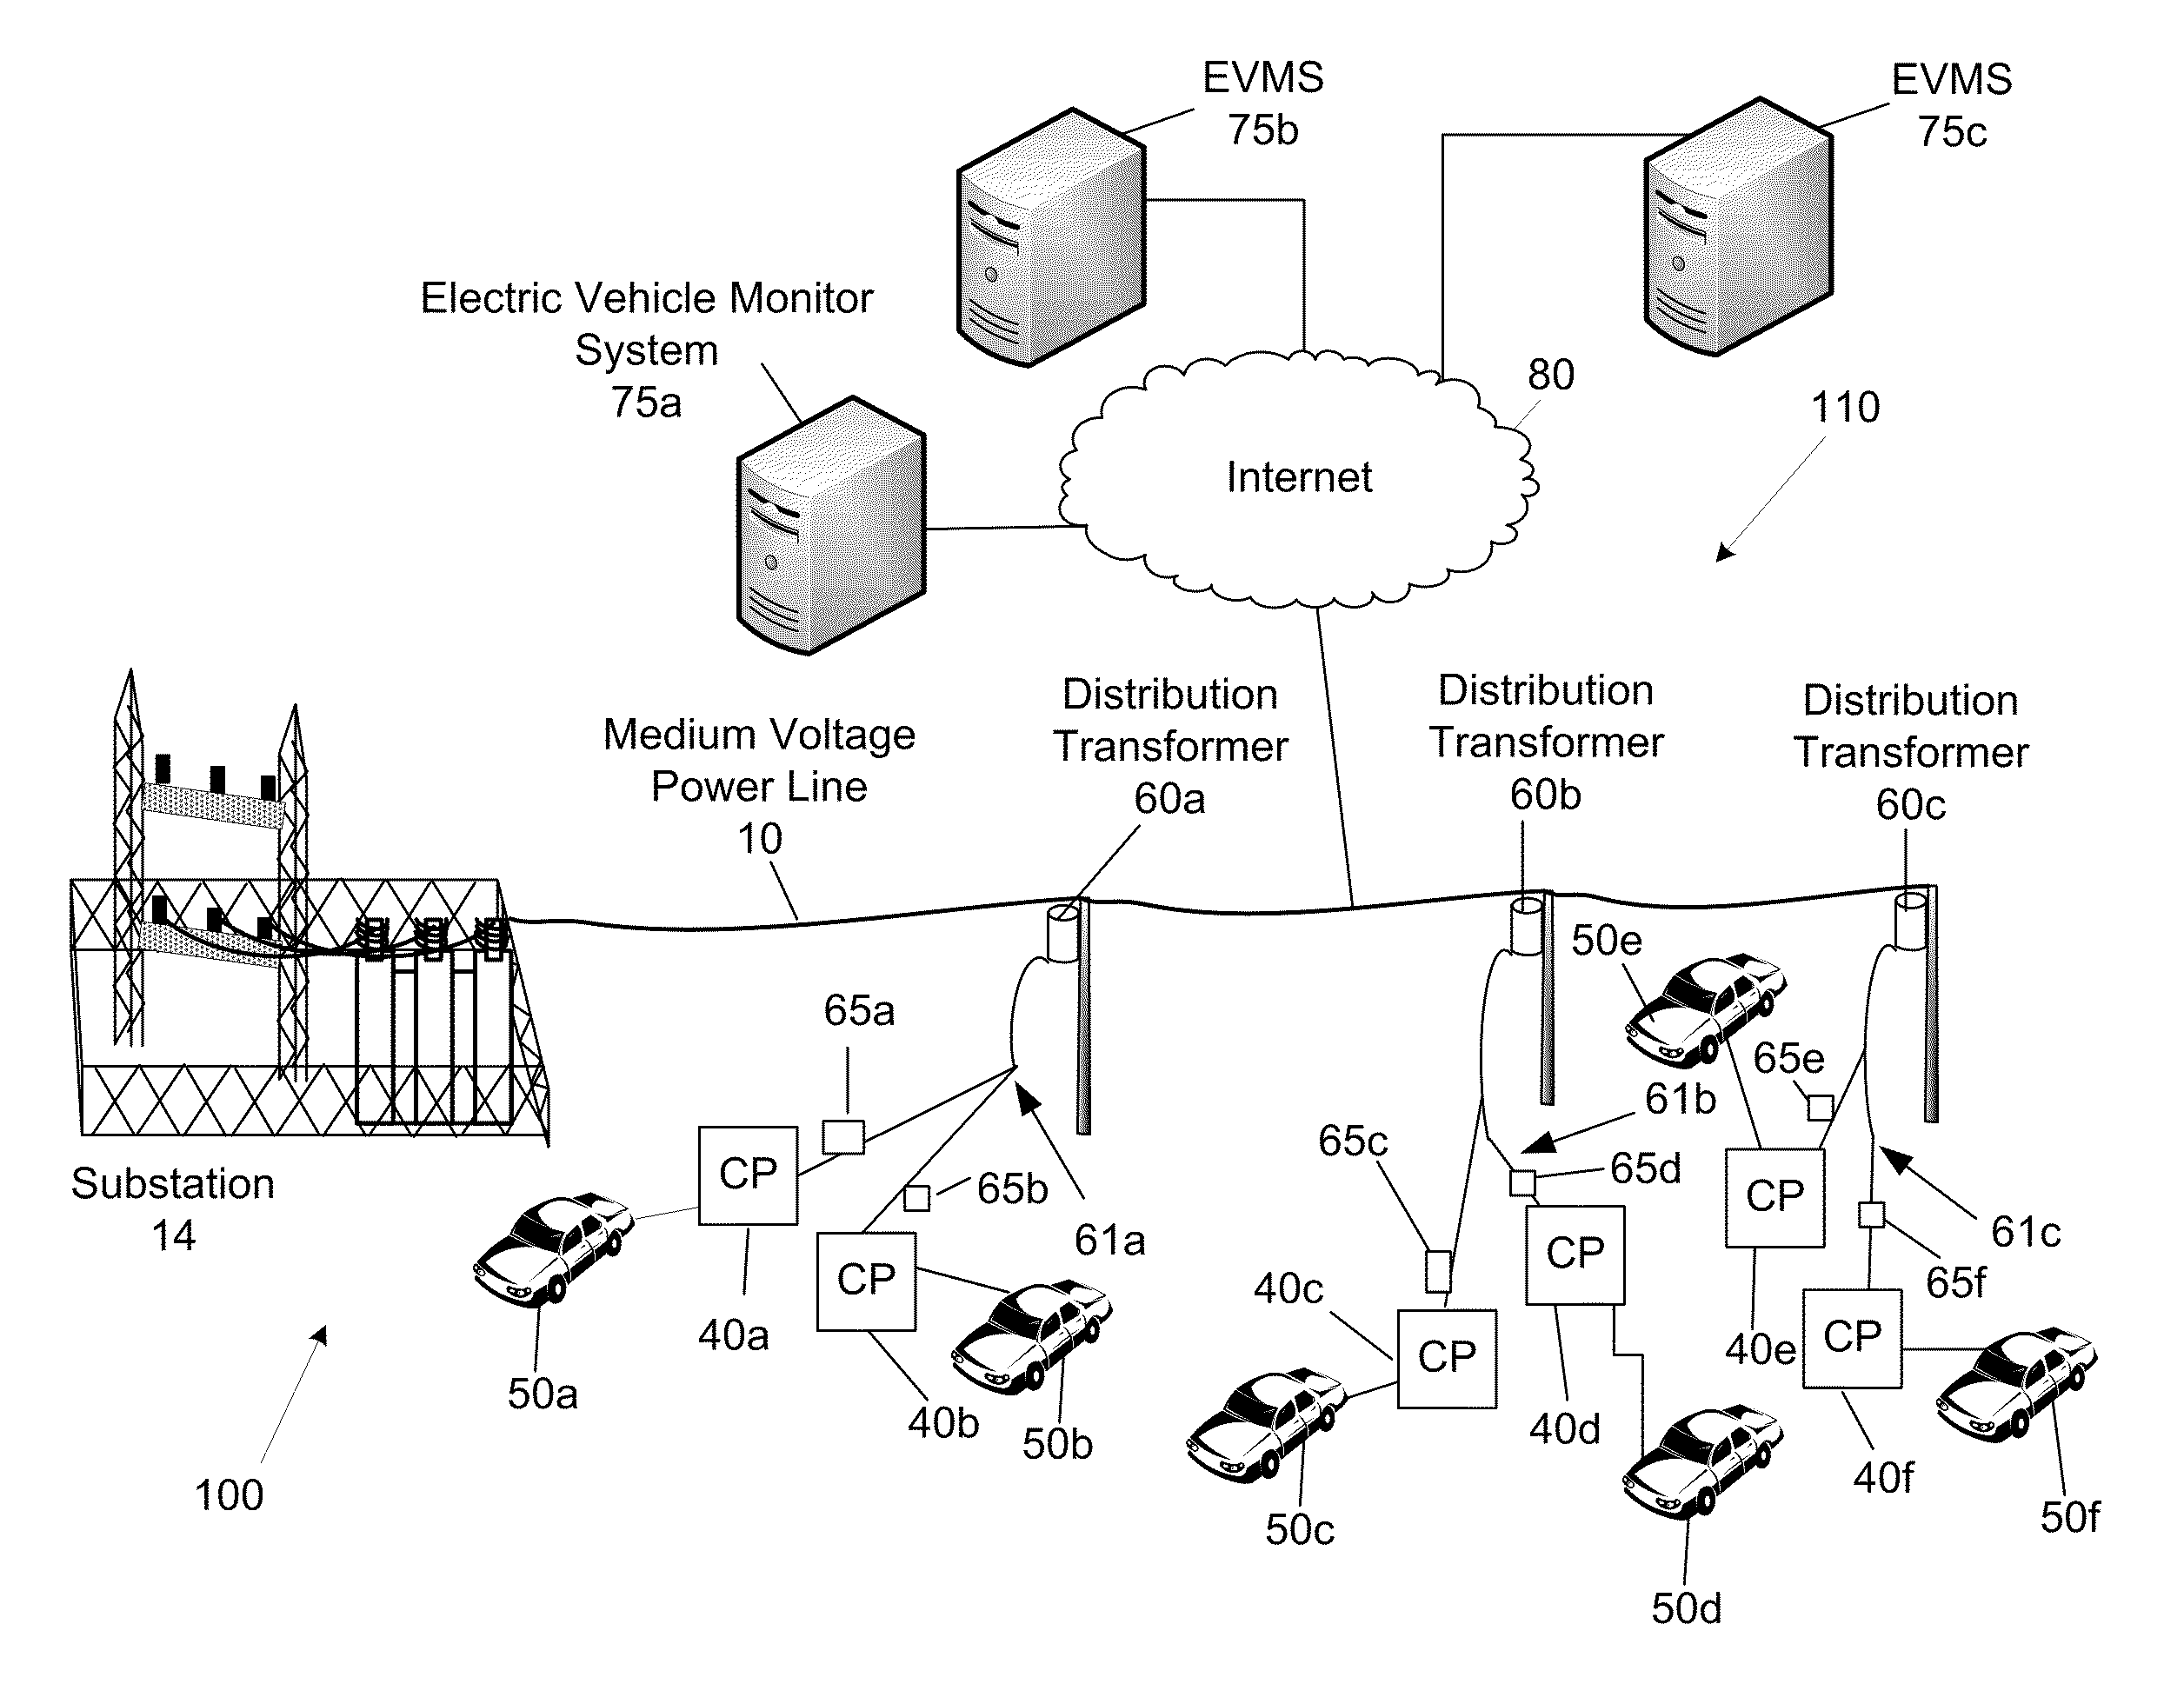 System and method for managing the distributed generation of power by a plurality of electric vehicles